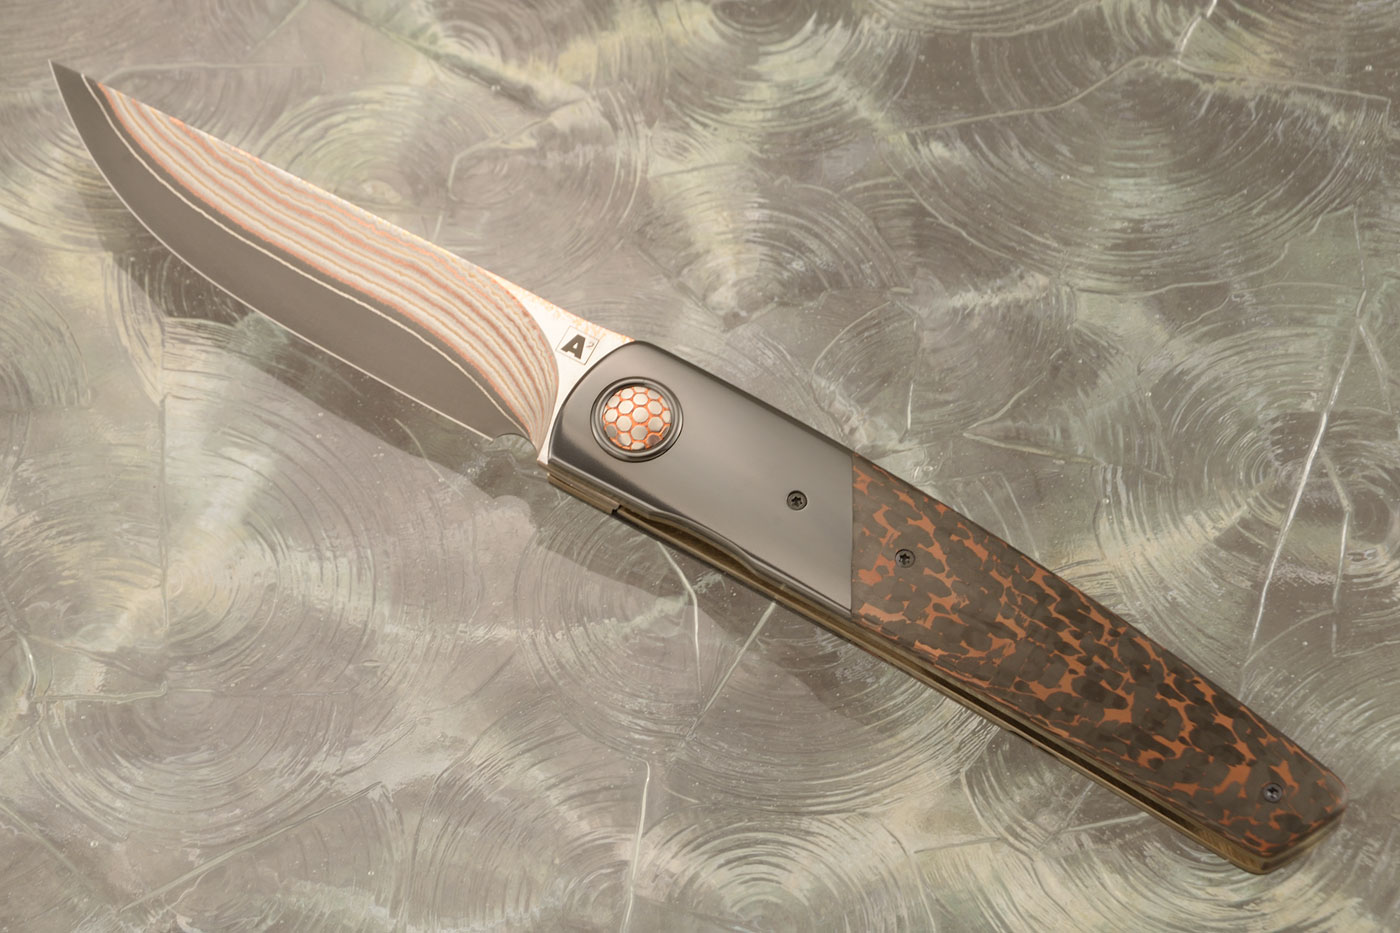 A10 Dress Front Flipper with Copper Snakeskin FatCarbon, Zirconium and Super Conductor (Ceramic IKBS) - Stainless Yu-Shoku